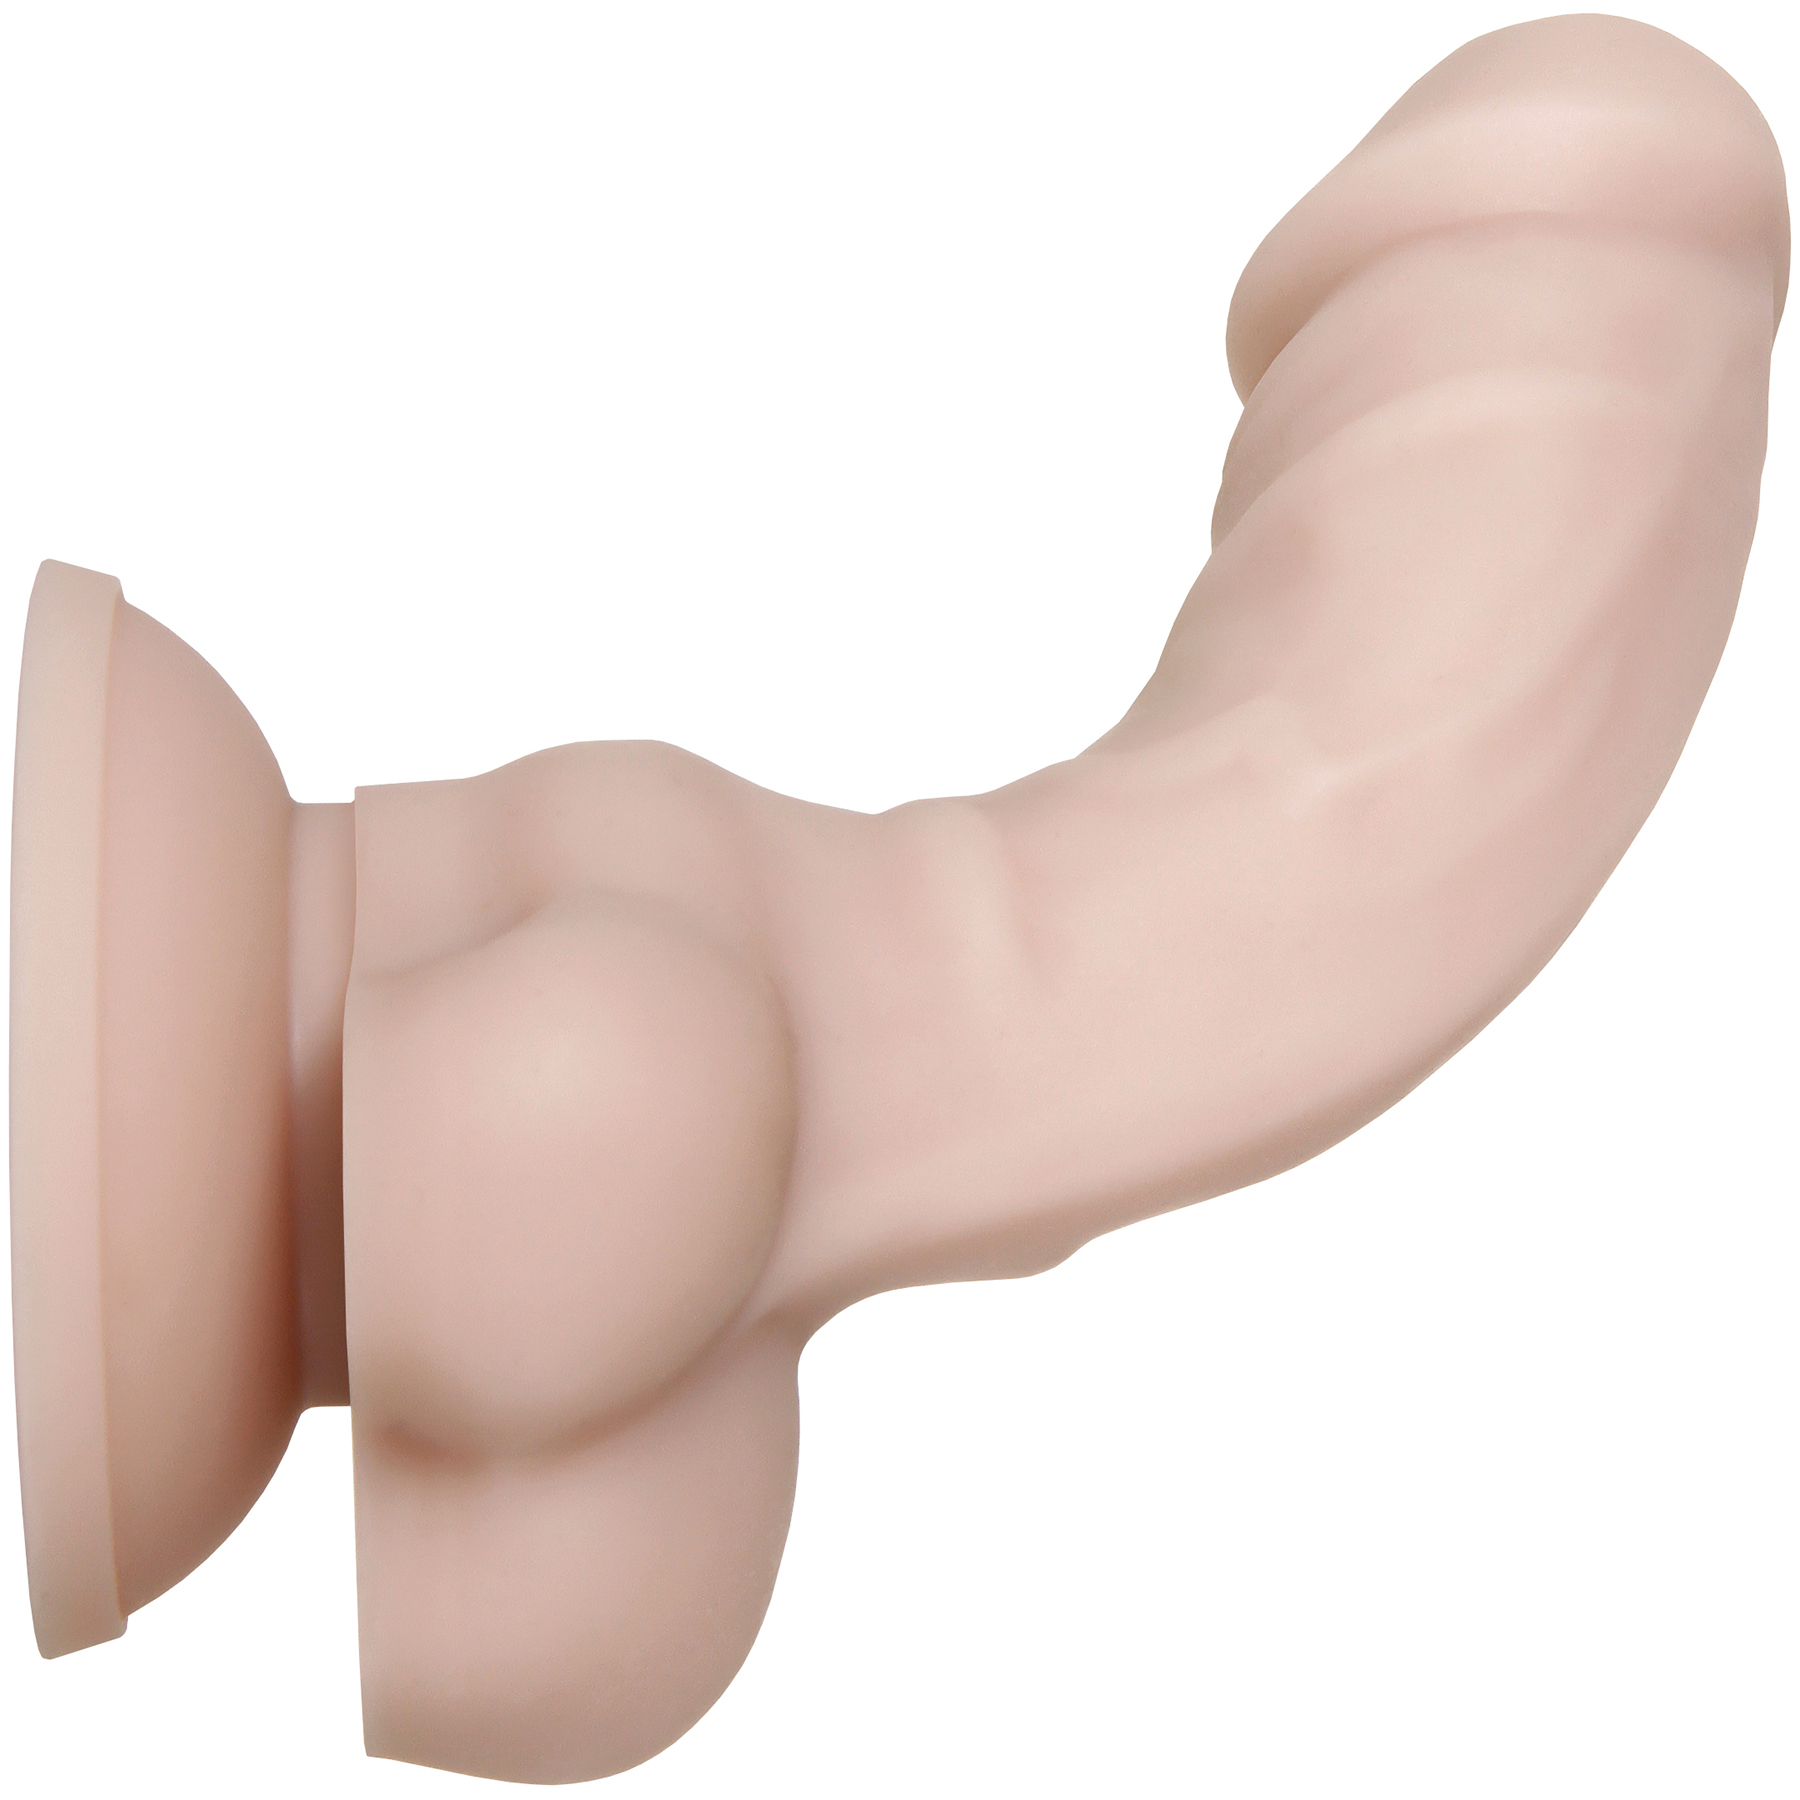 Real Supple Poseable 6 Inch Silicone Dildo By Evolved Novelties - Bent